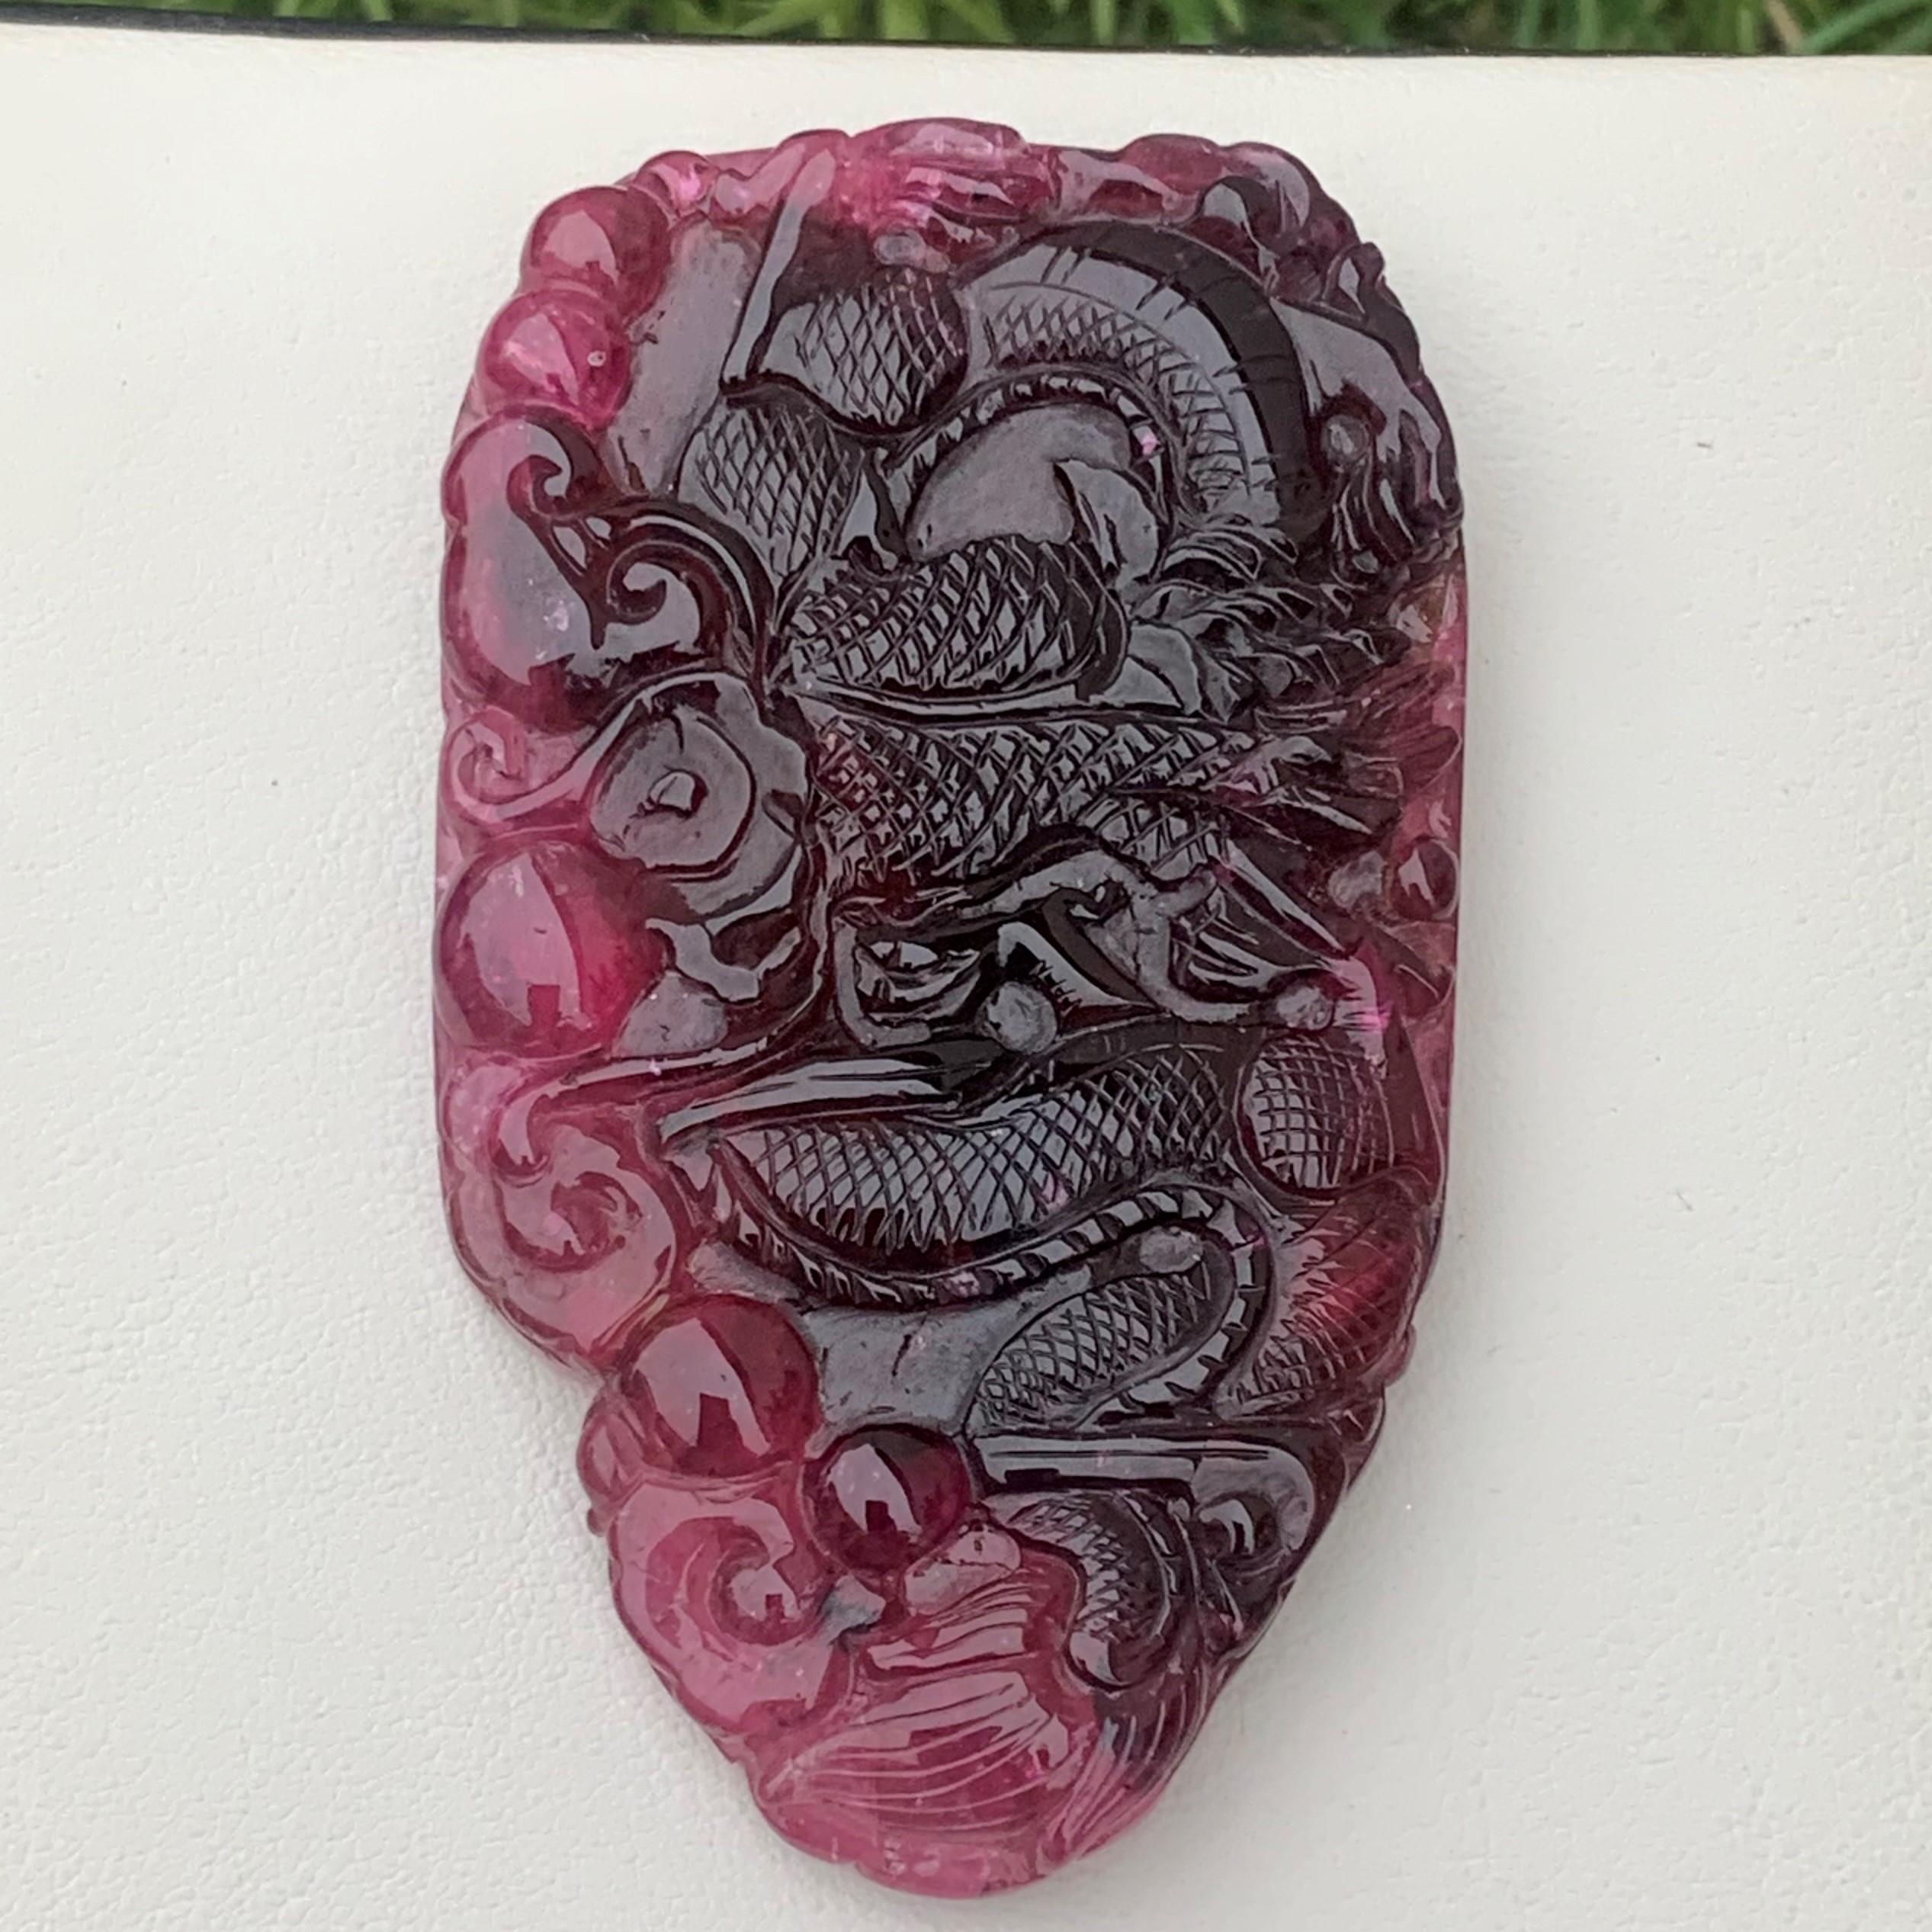 Bicolor Tourmaline Carved
Weight: 295.30 Carats
Dimension: 78x45x9 Mm
Origin: Africa
Color: Red & Pink
Shape: Carving
Quality: AAA
.
Bicolor tourmaline is connected to the heart chakra, which makes it good for cleansing and removing any blockages.